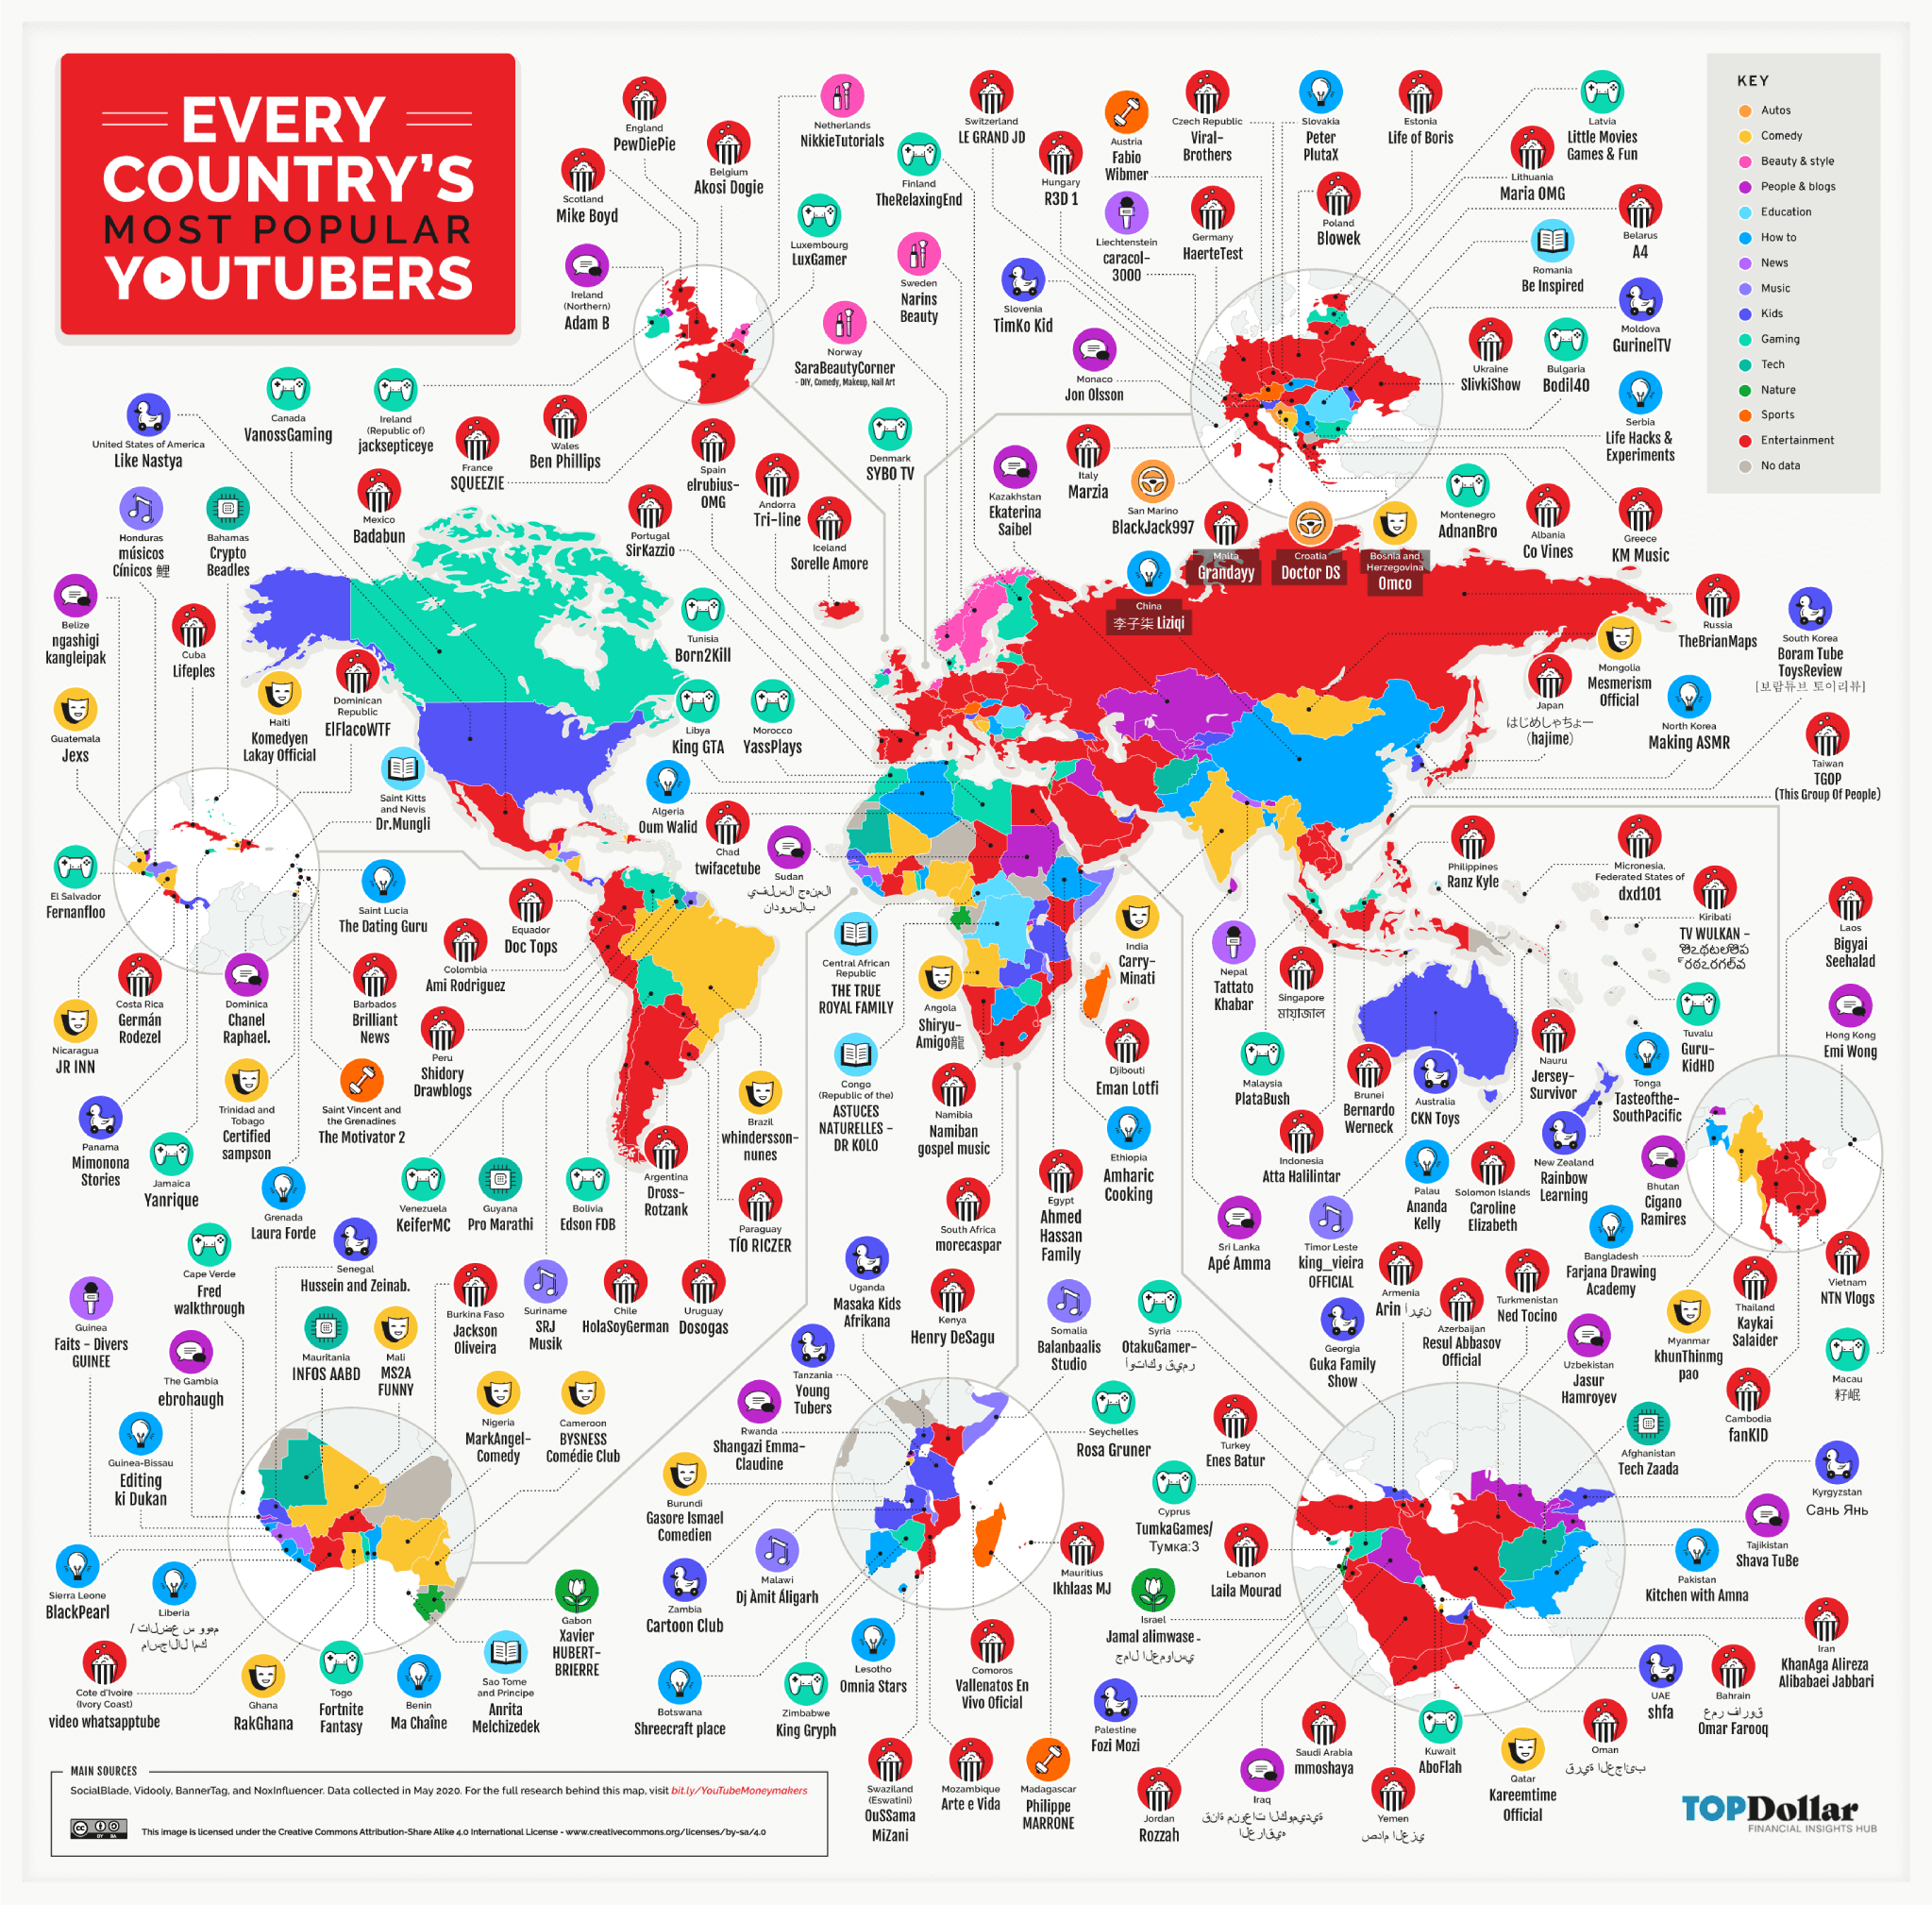 New map shows every country's most popular YouTube channel (and estimated earnings)